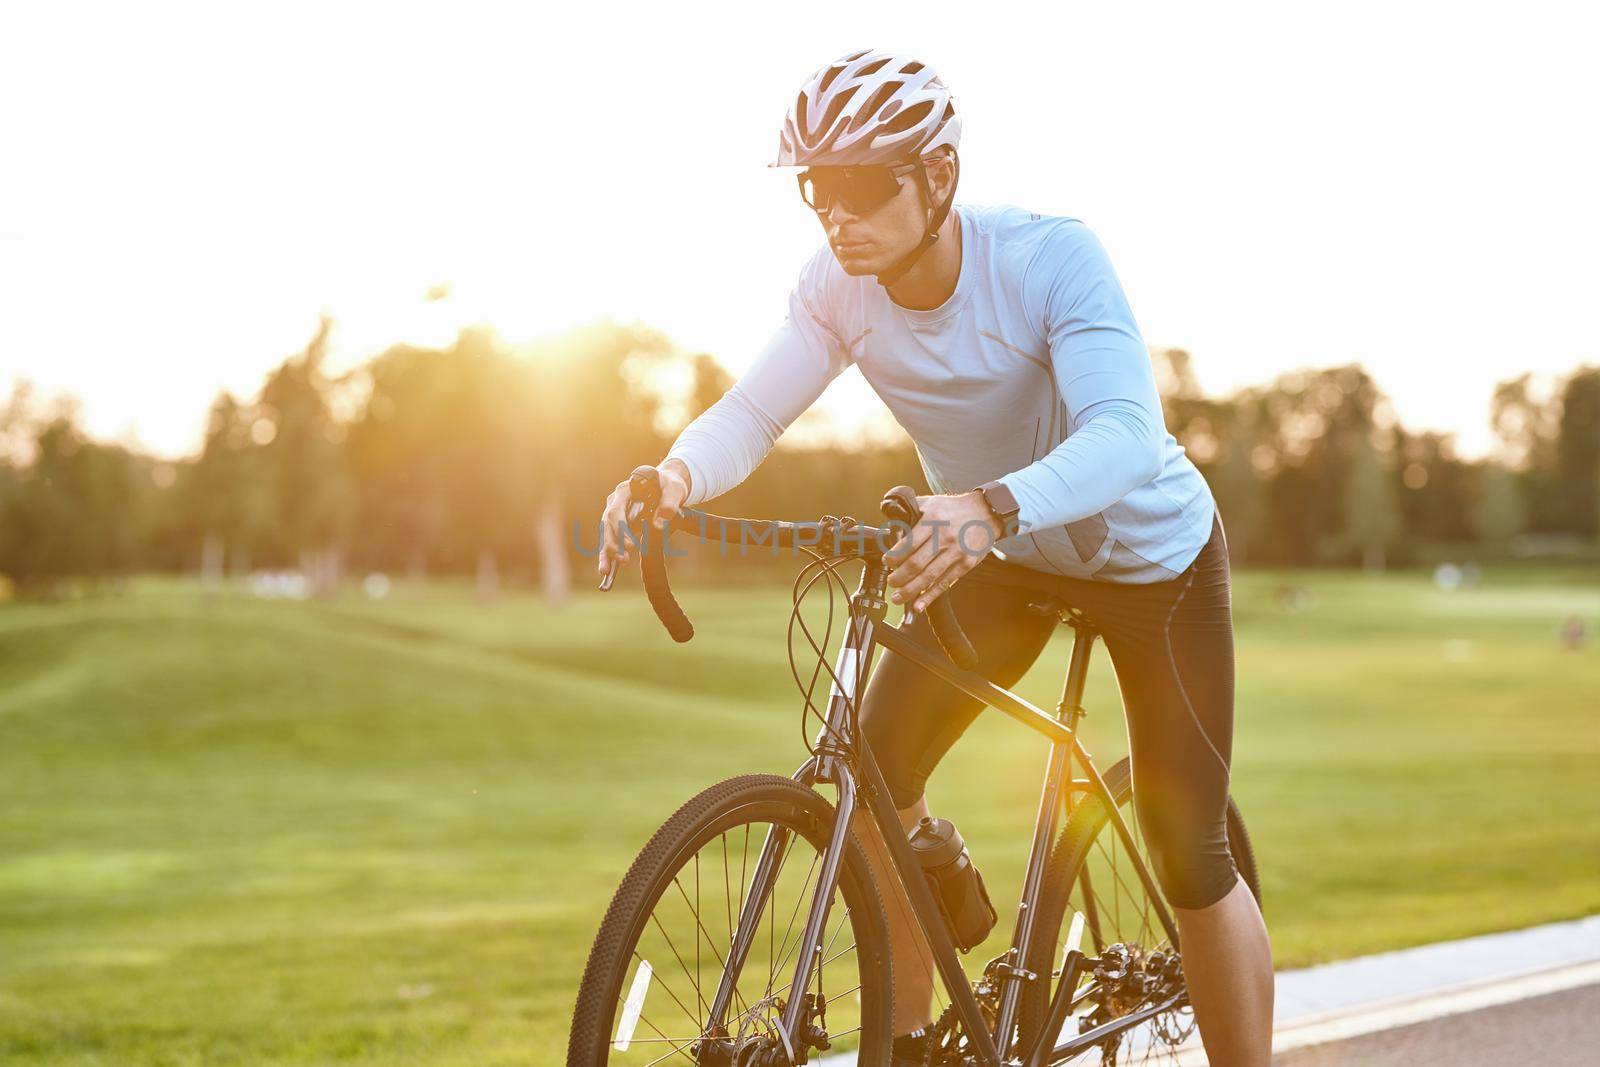 Professional road bicycle racer in sportswear and protective helmet standing on the road at sunset, ready to ride. Man cycling in the park by friendsstock